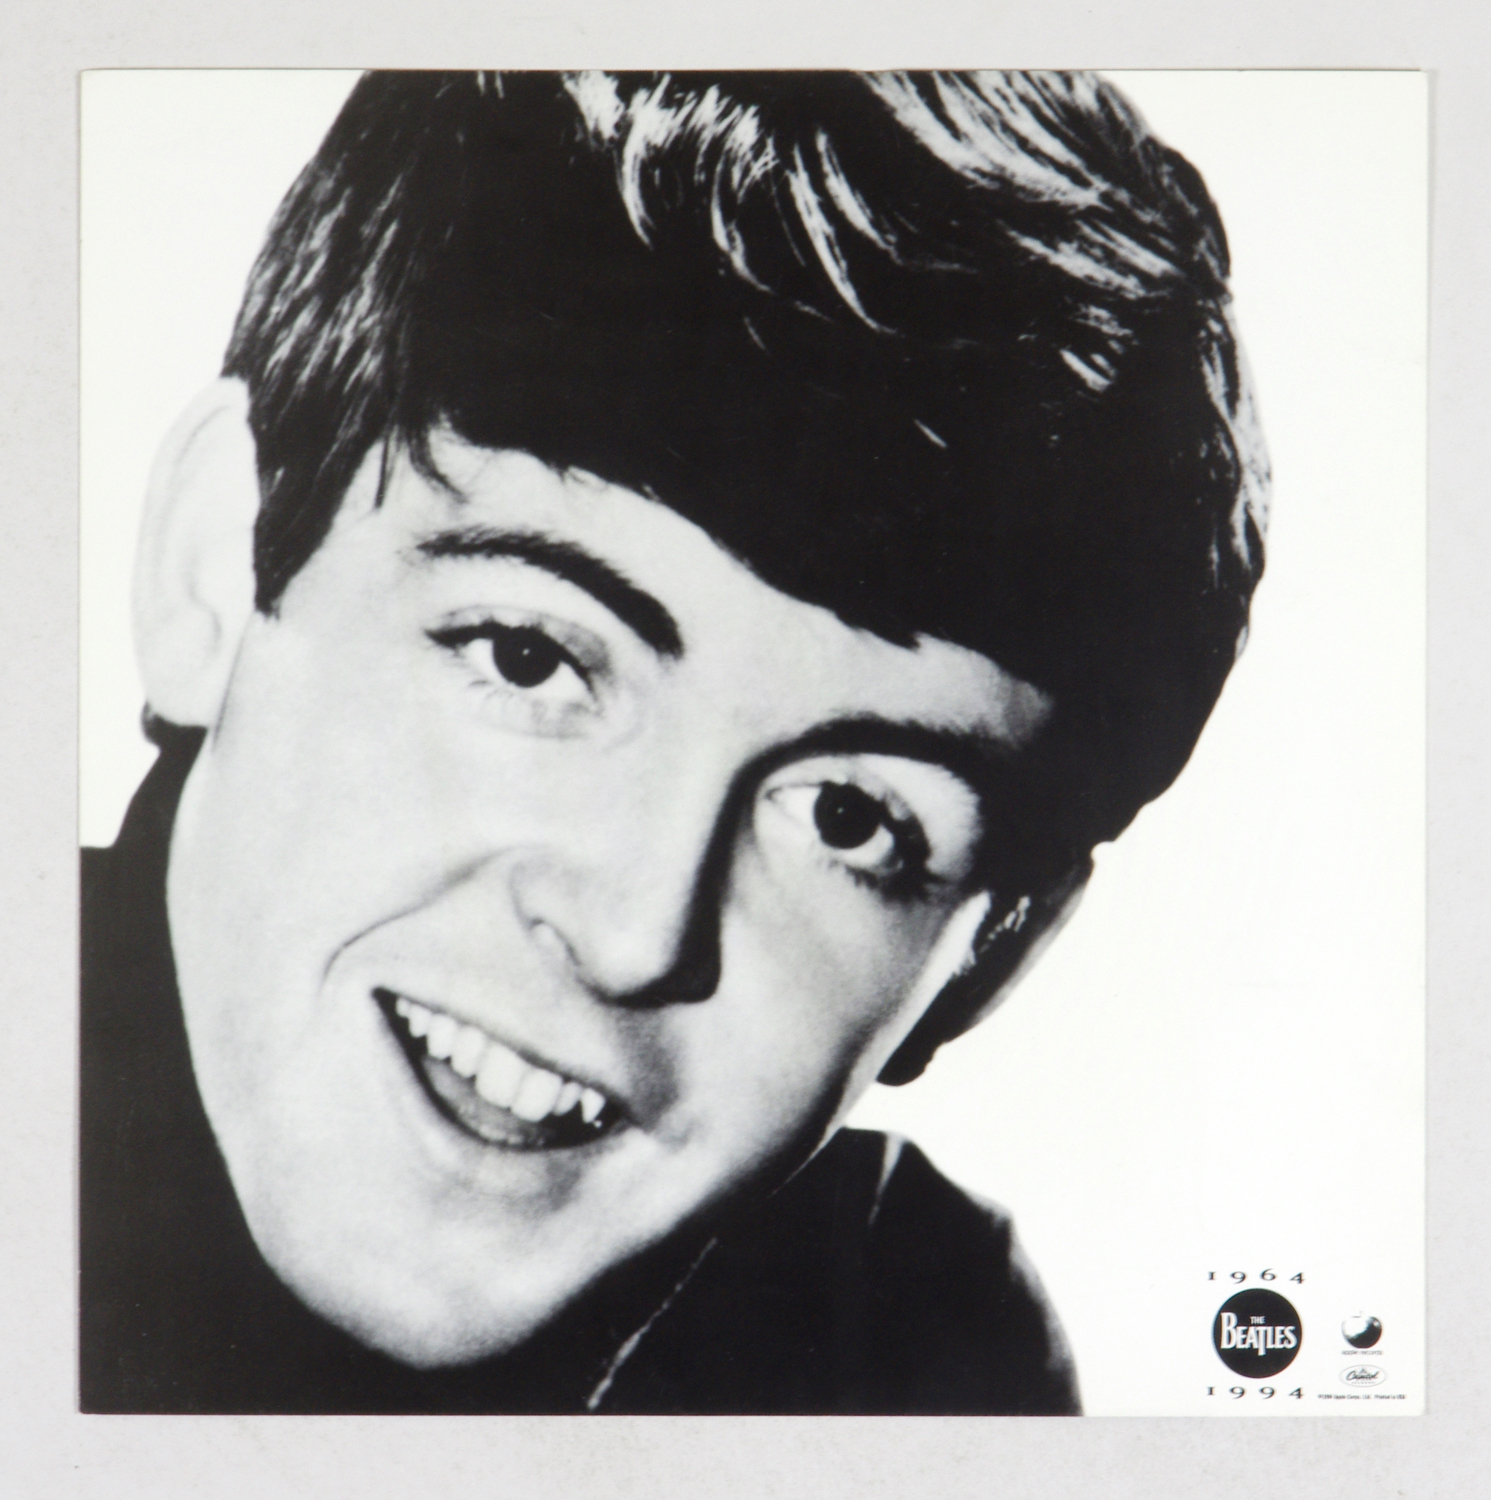 Paul McCartney Ringo Starr Poster Flat 1994 Apple and Capitol Records 12 x 12